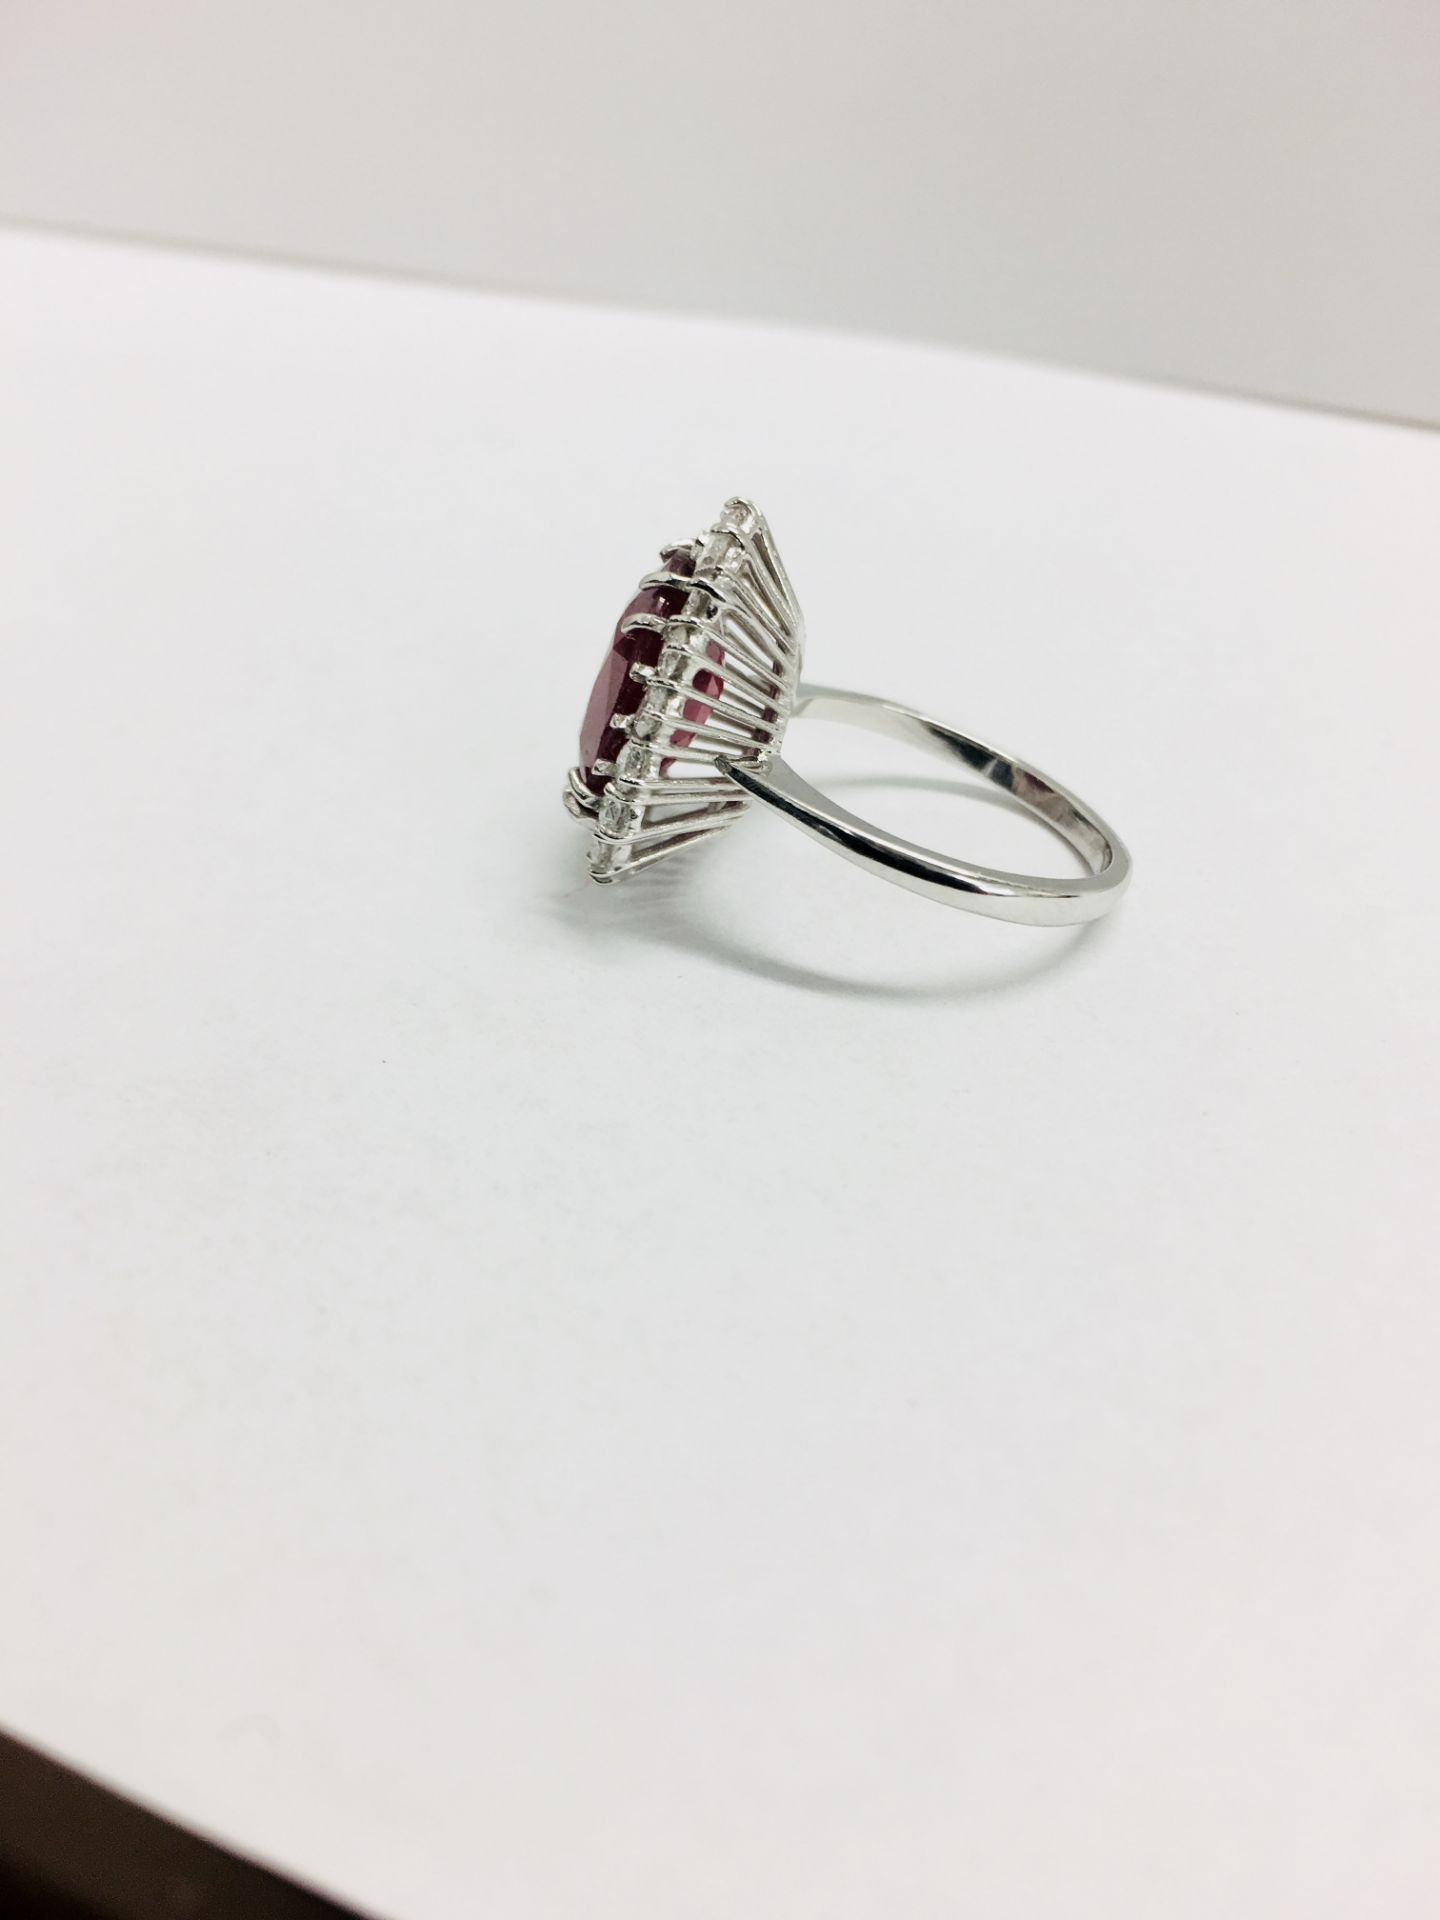 10Ct Ruby And Diamond Cluster Ring. - Image 5 of 6